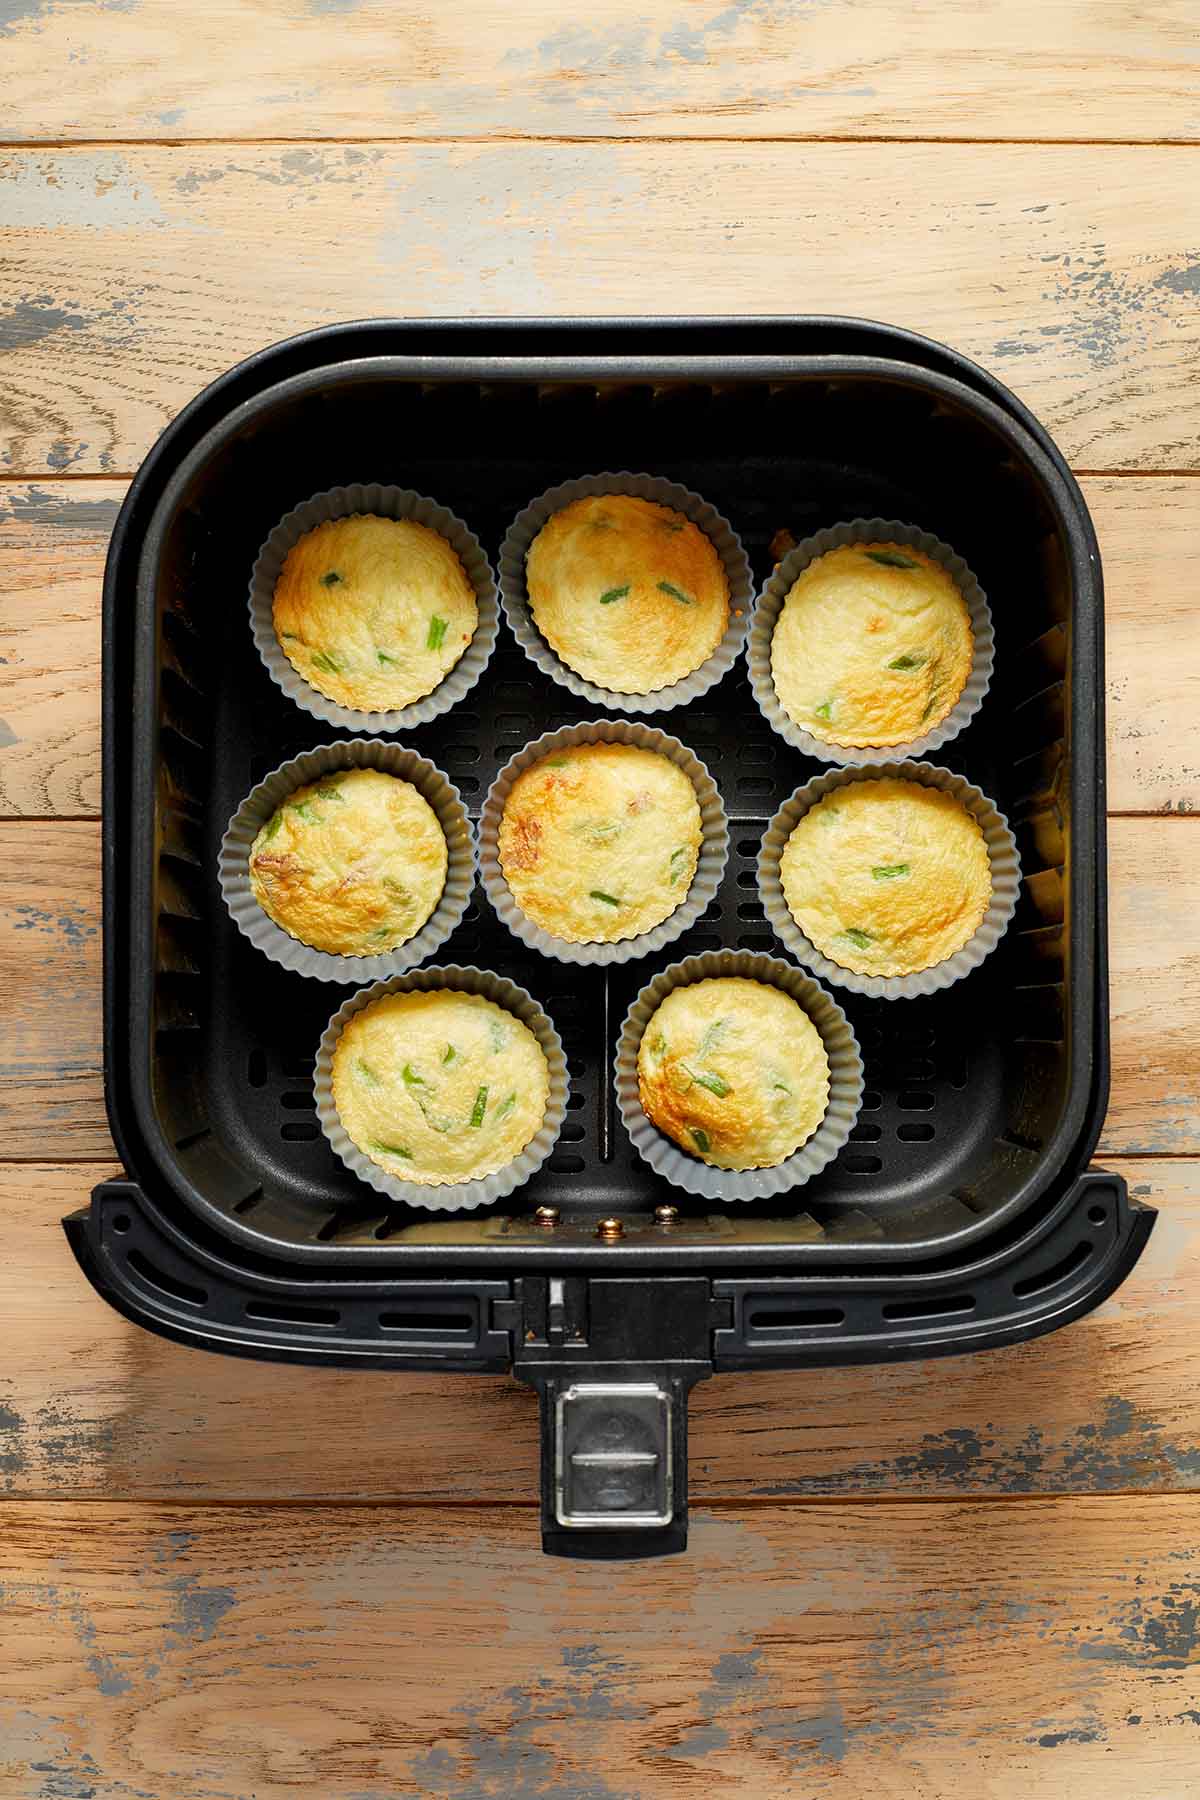 Cooked egg bites in muffin cups in the air fryer basket.